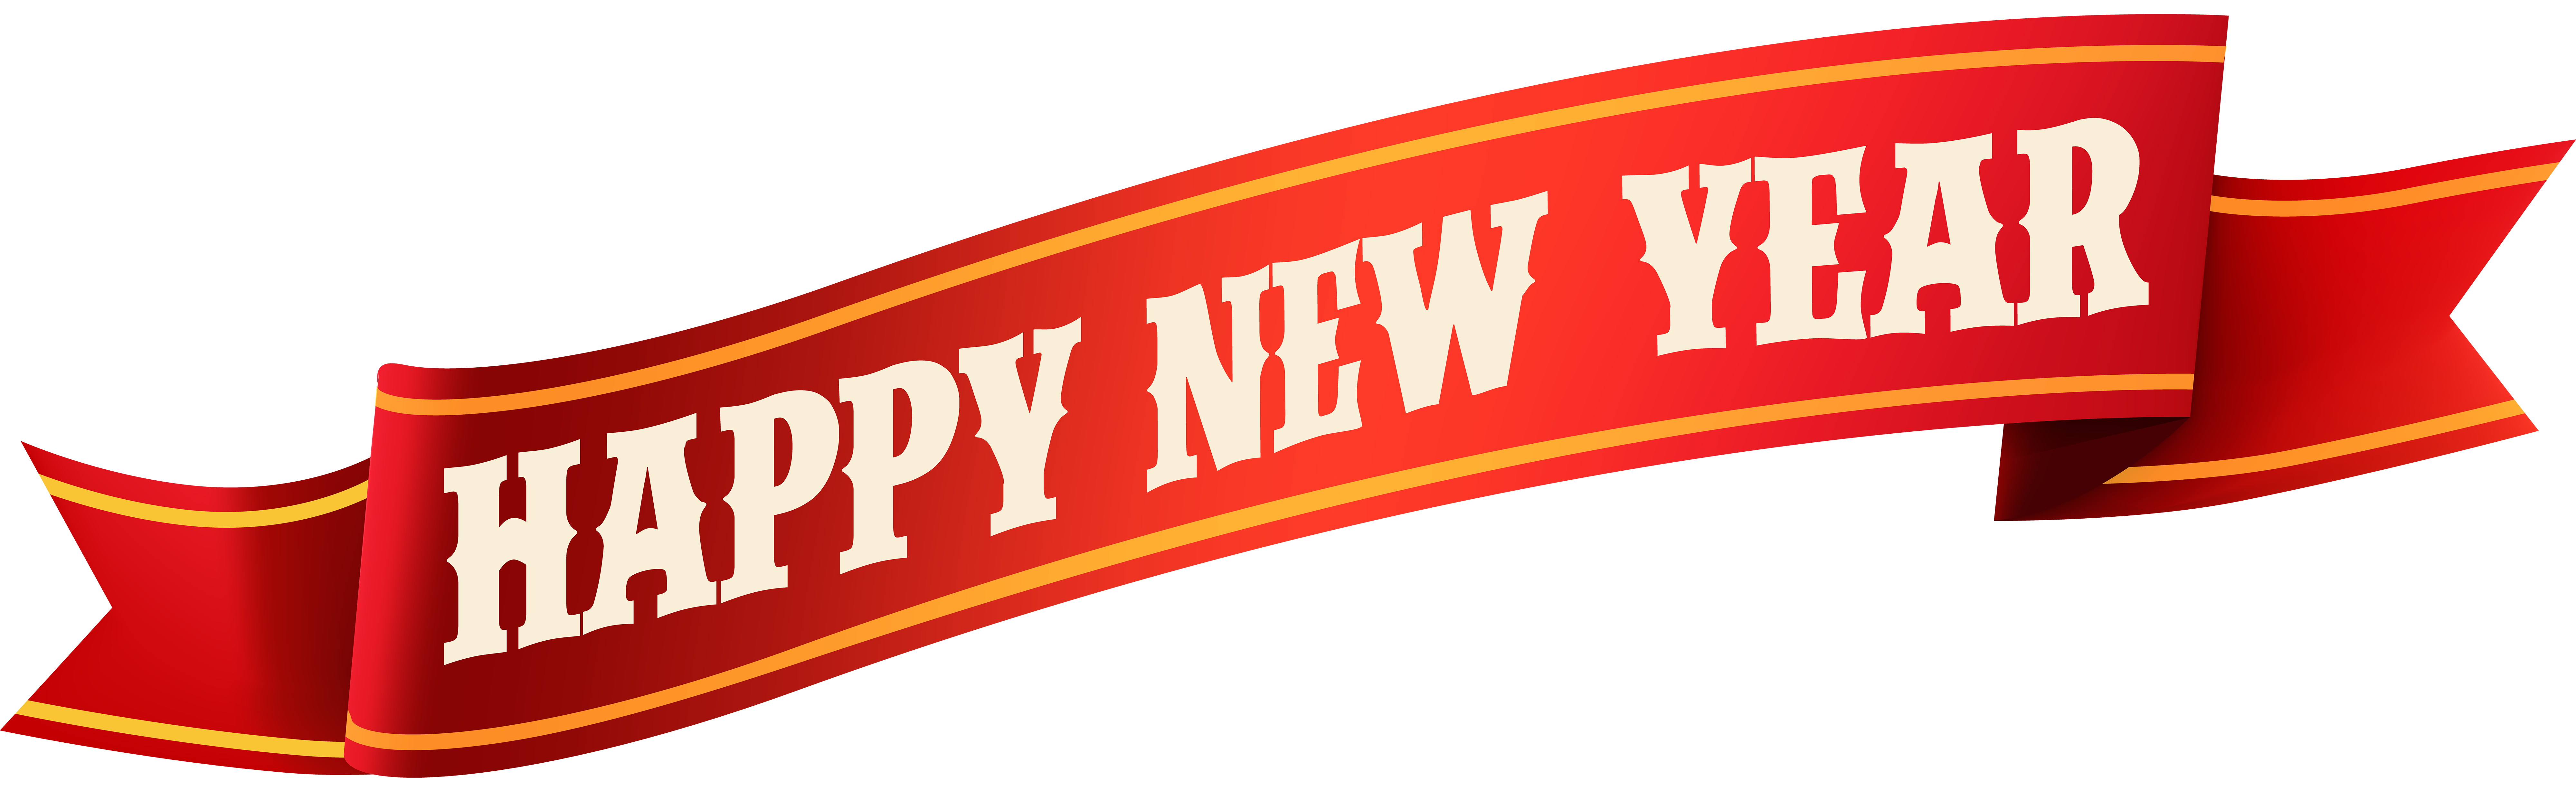 New Years Day New Years Eve Happy New Year PNG Clip Art png download